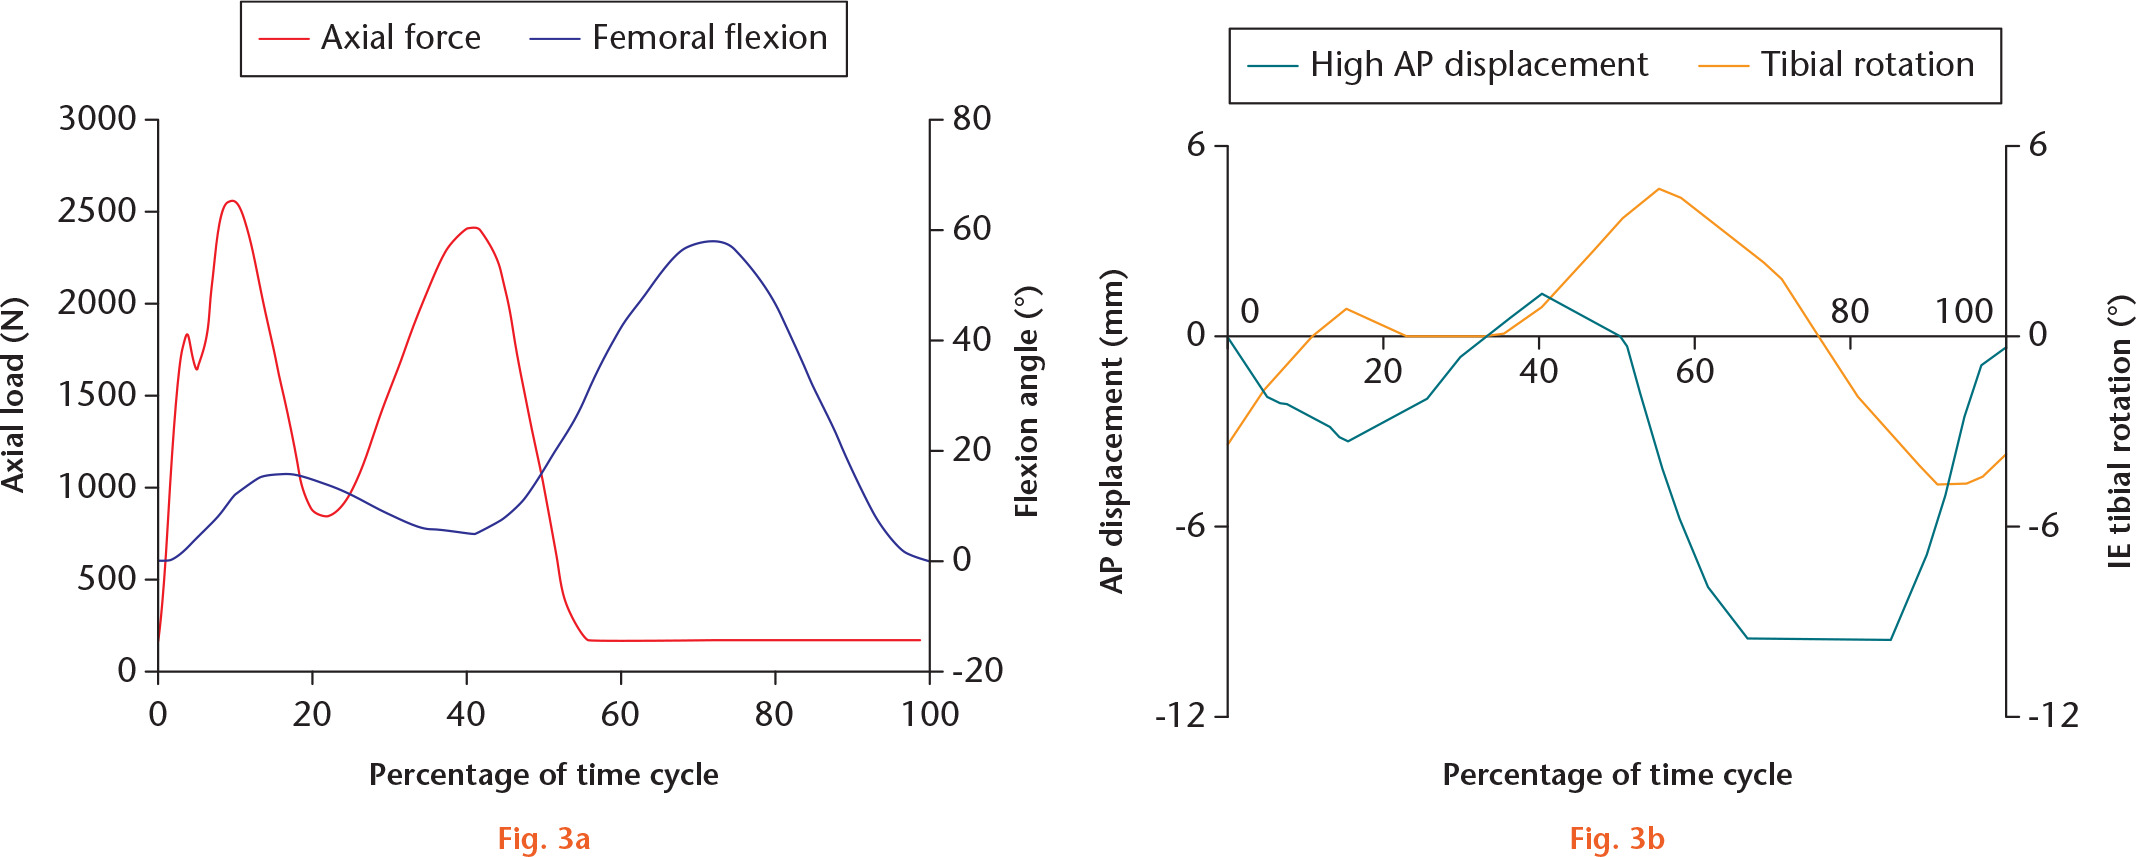 Fig. 3 
          Profiles of: a) axial force and femoral flexion inputs; and b) tibial displacement and rotation inputs. AP, anteroposterior; IE, internal–external.
        